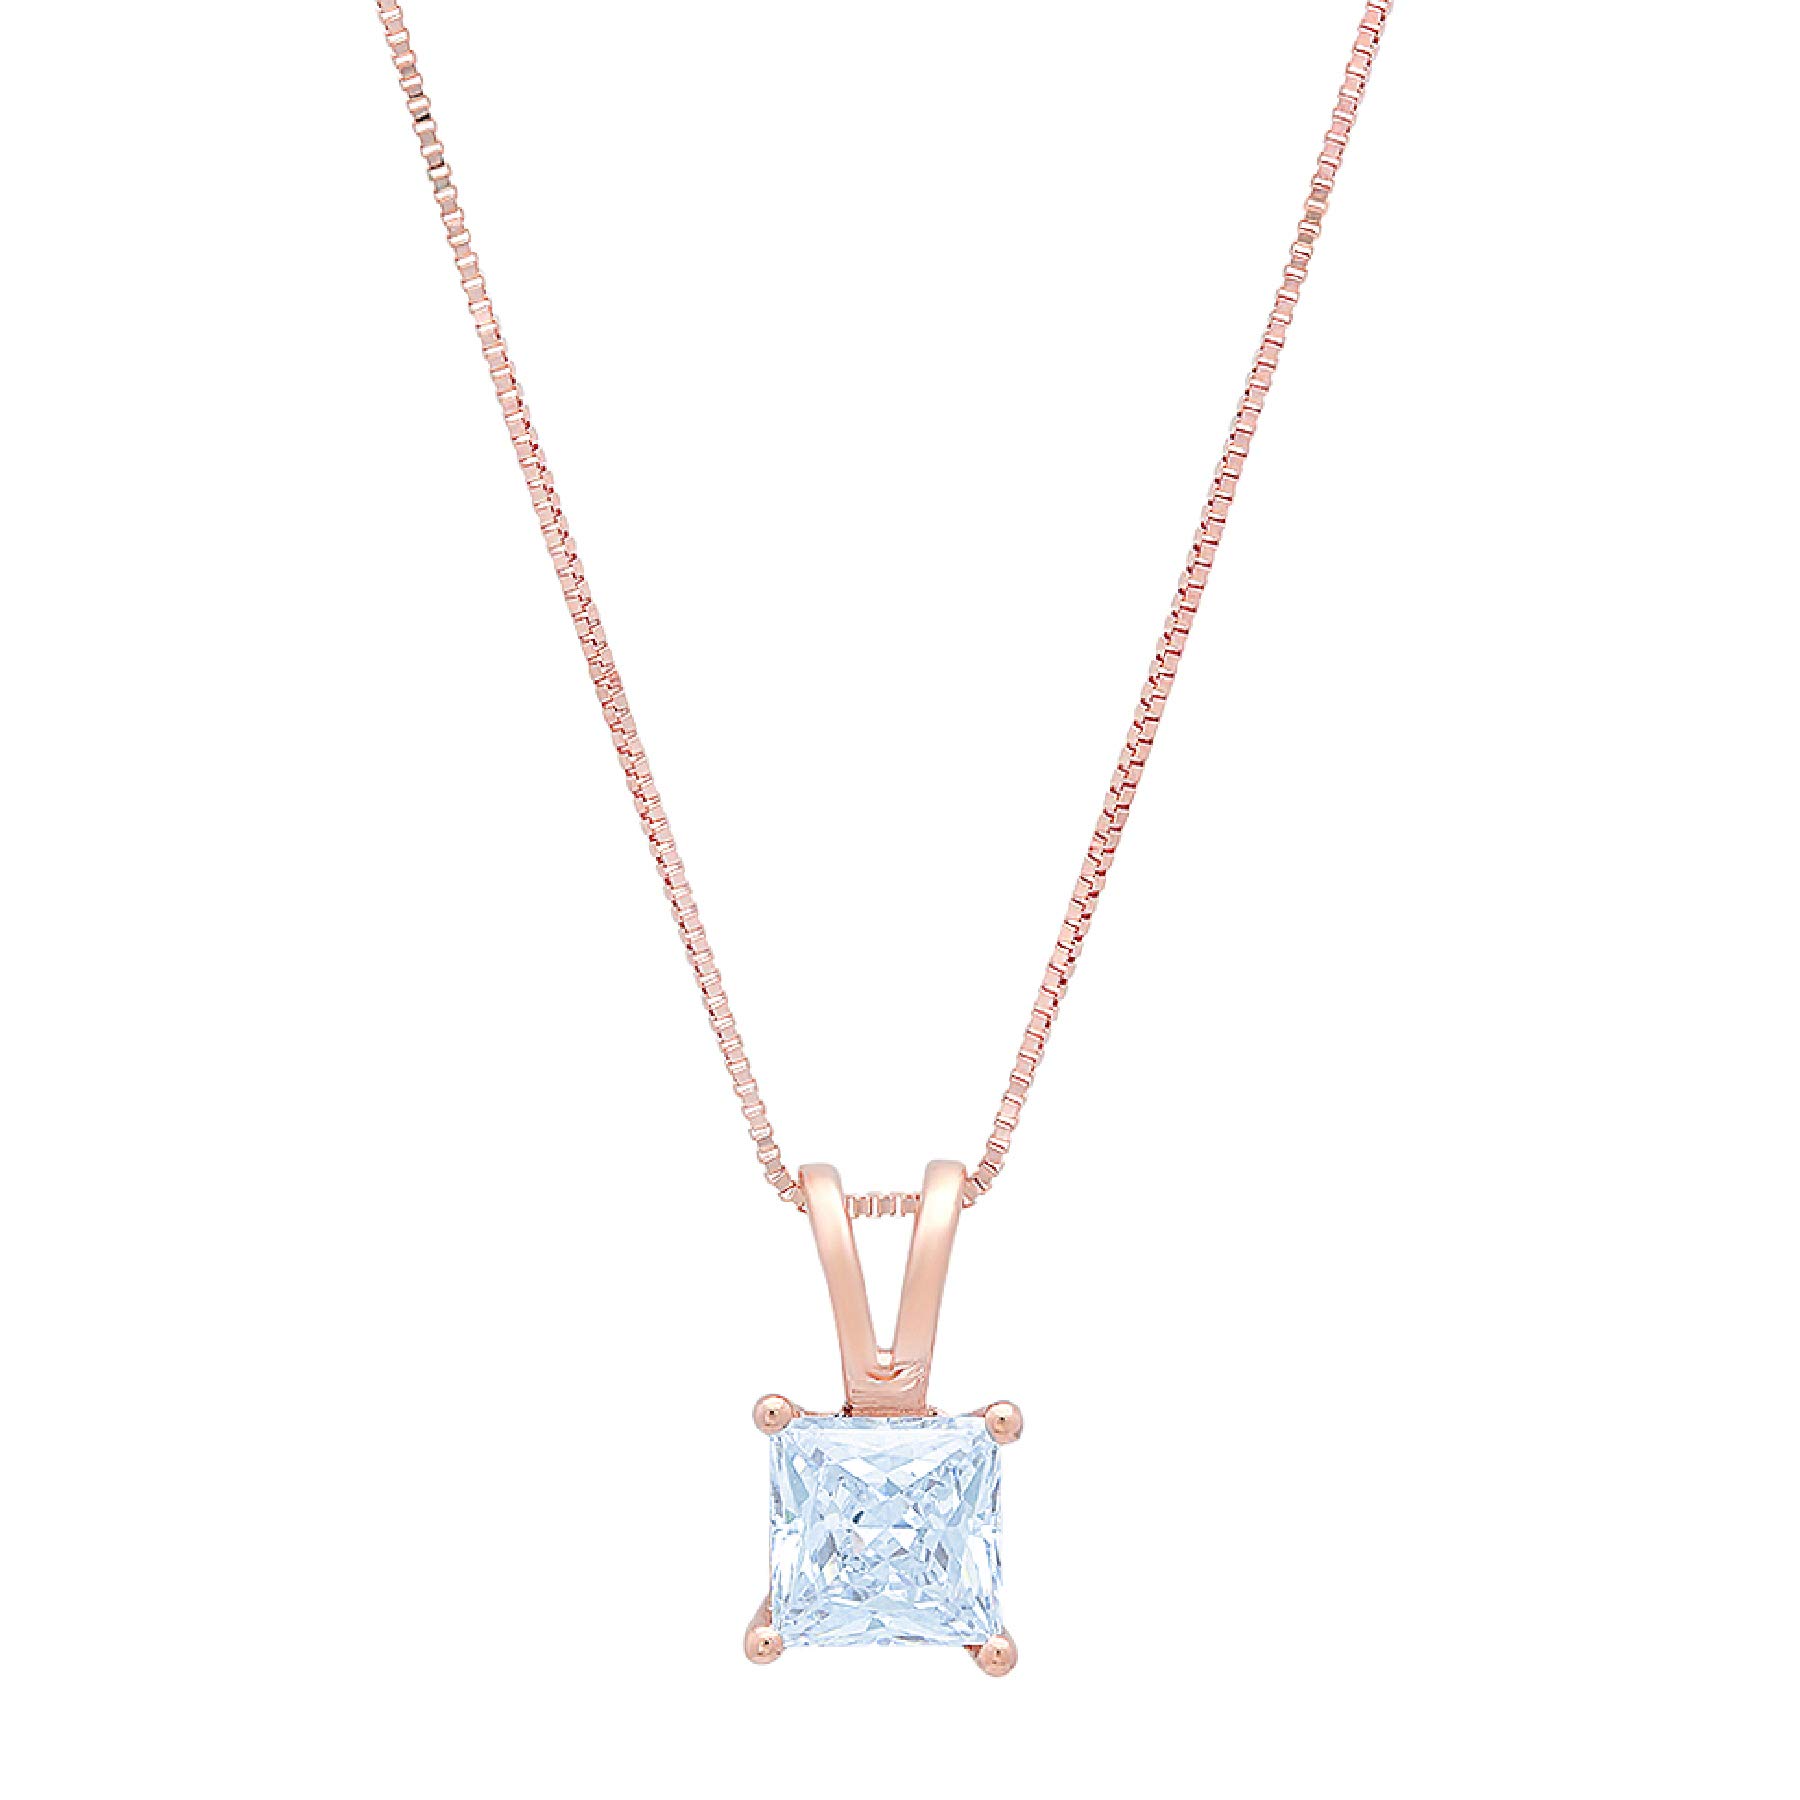 Clara Pucci 2.6 ct Brilliant Princess Cut Stunning Genuine Flawless Blue Simulated Diamond Gemstone Solitaire Pendant Necklace With 16